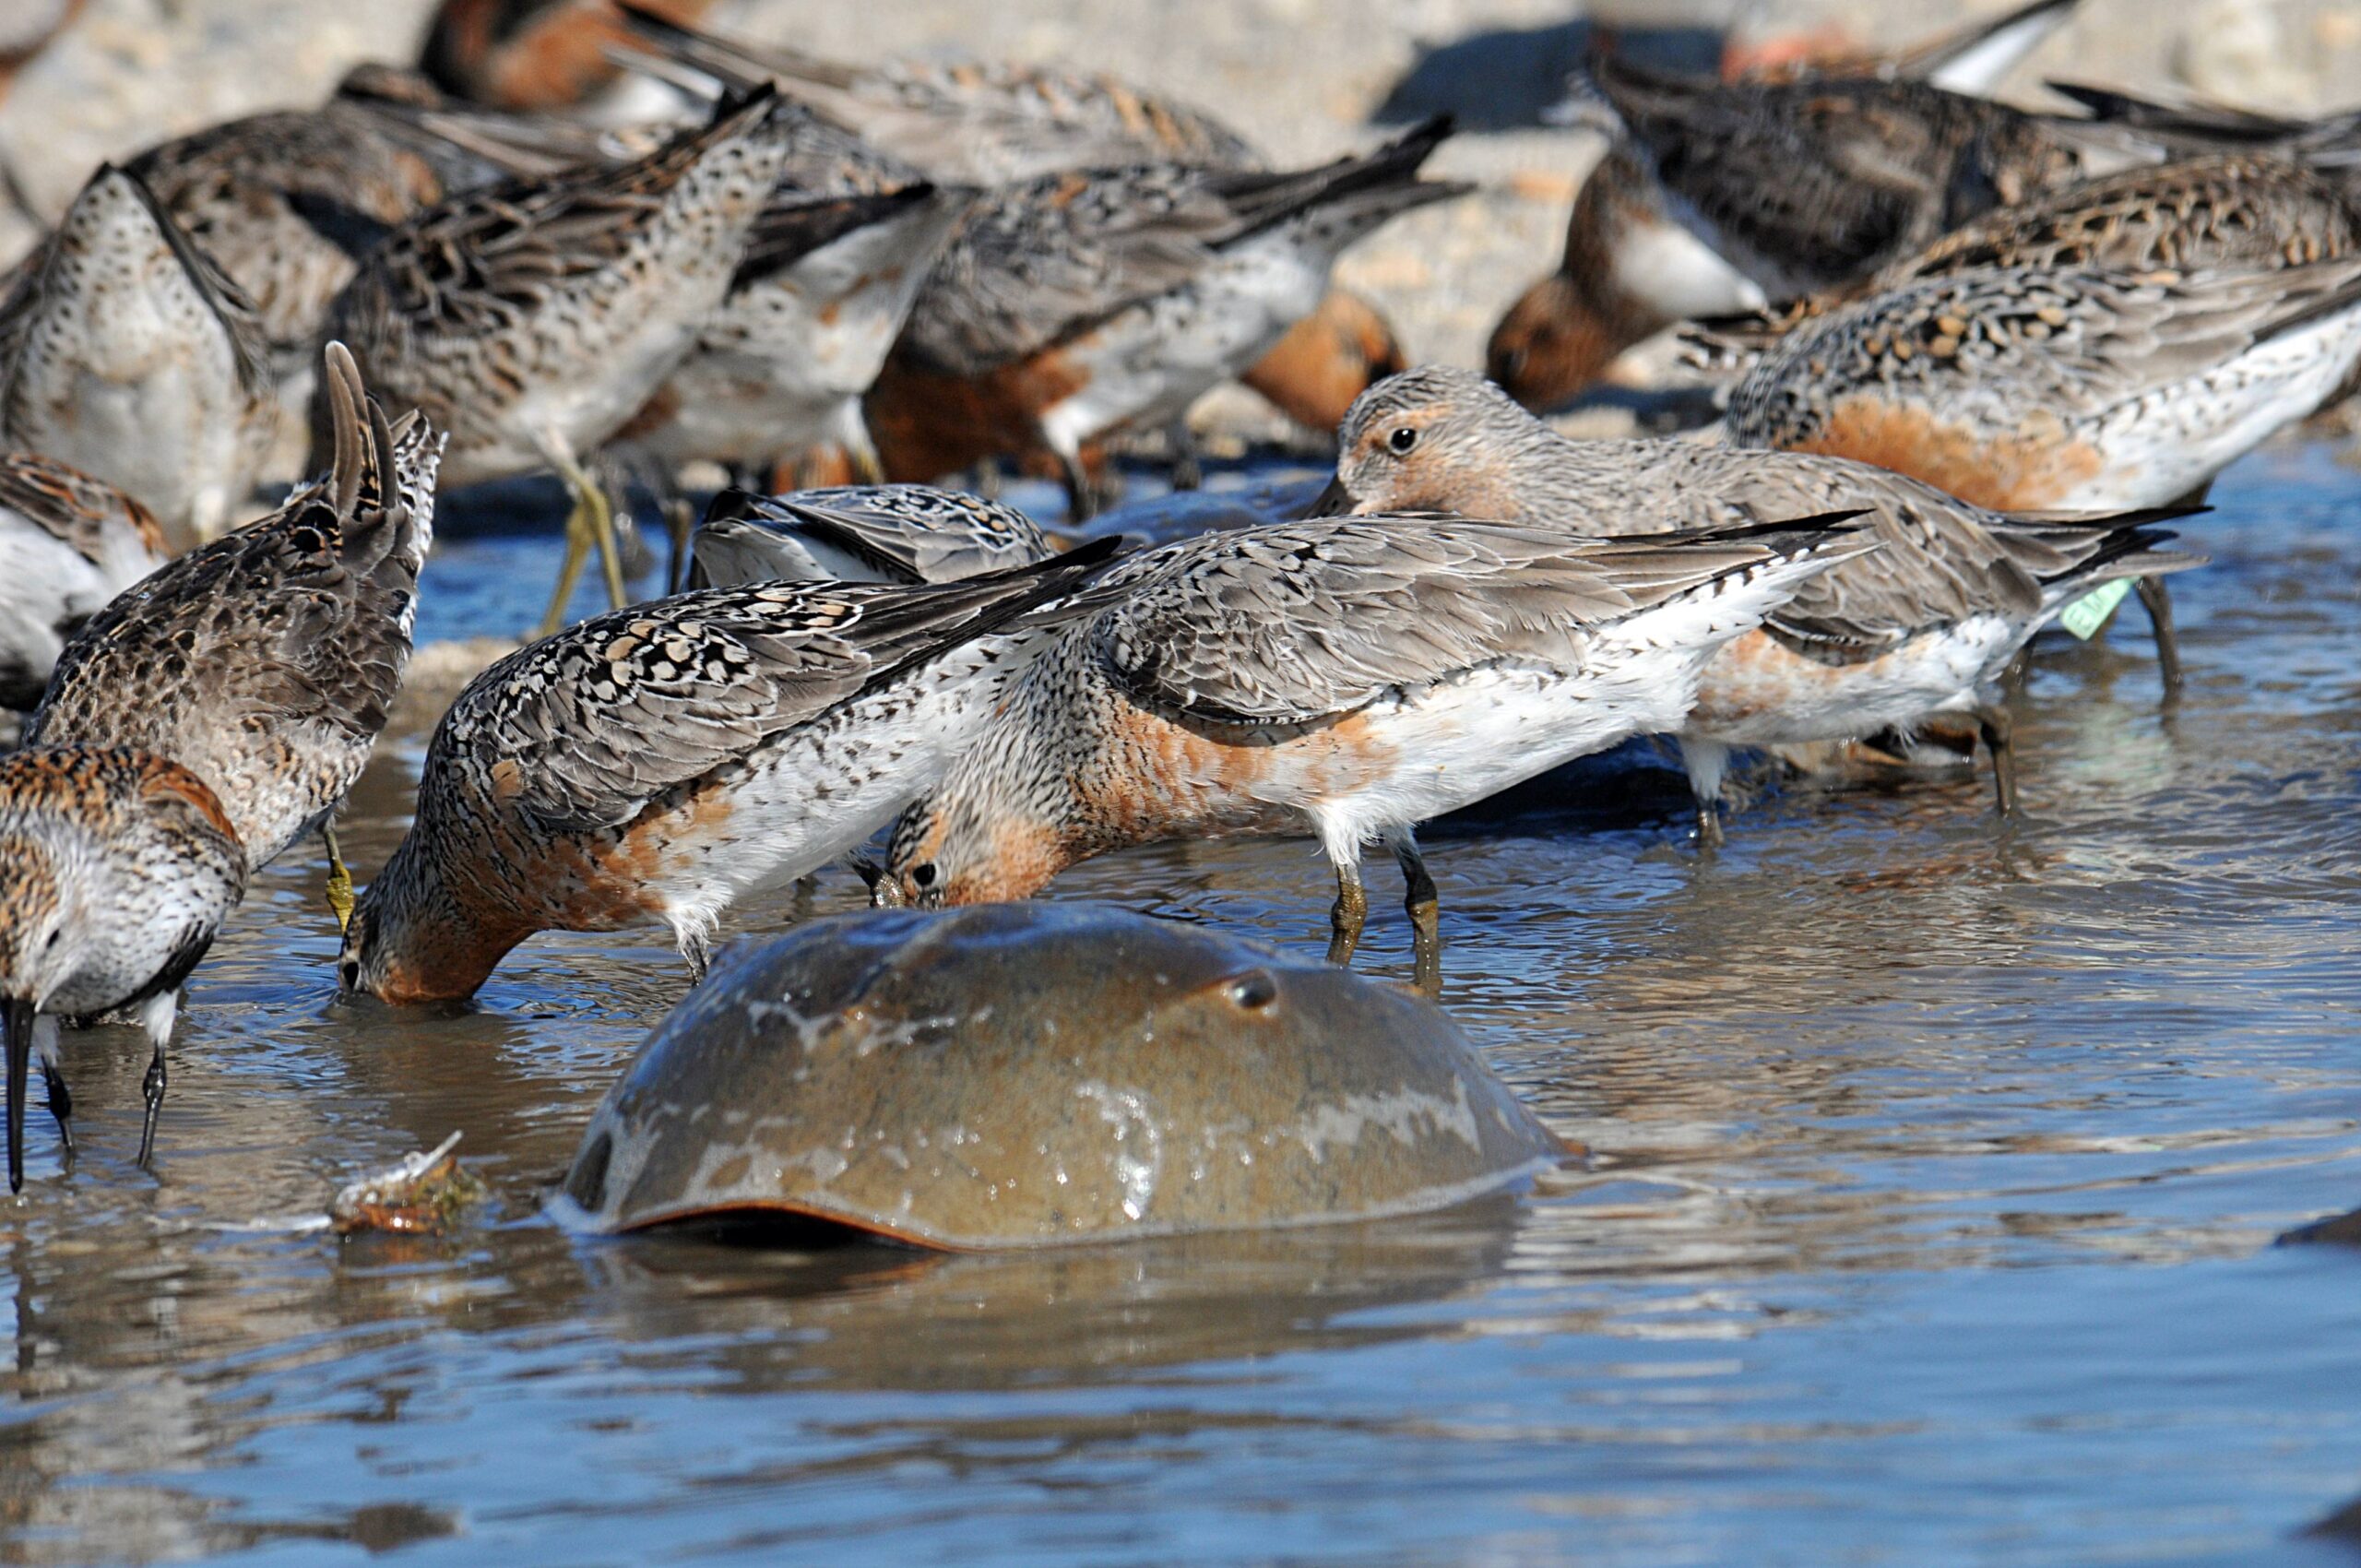 Red knots are migrating shorebirds that feast on horseshoe crab eggs. Photo by Gregory Breese/USFWS